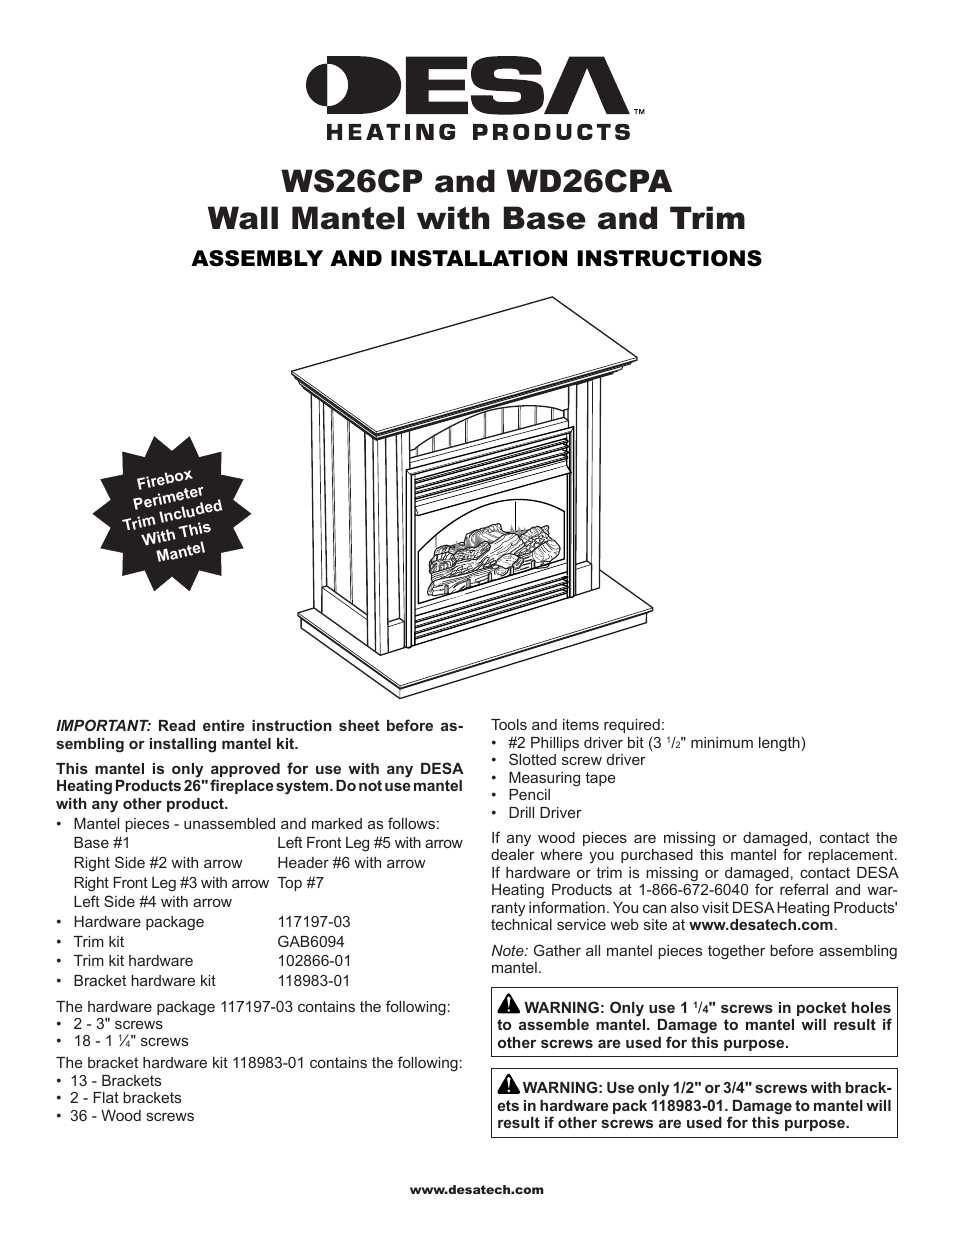 Wall Mantel with Base and Trim WD26CPA